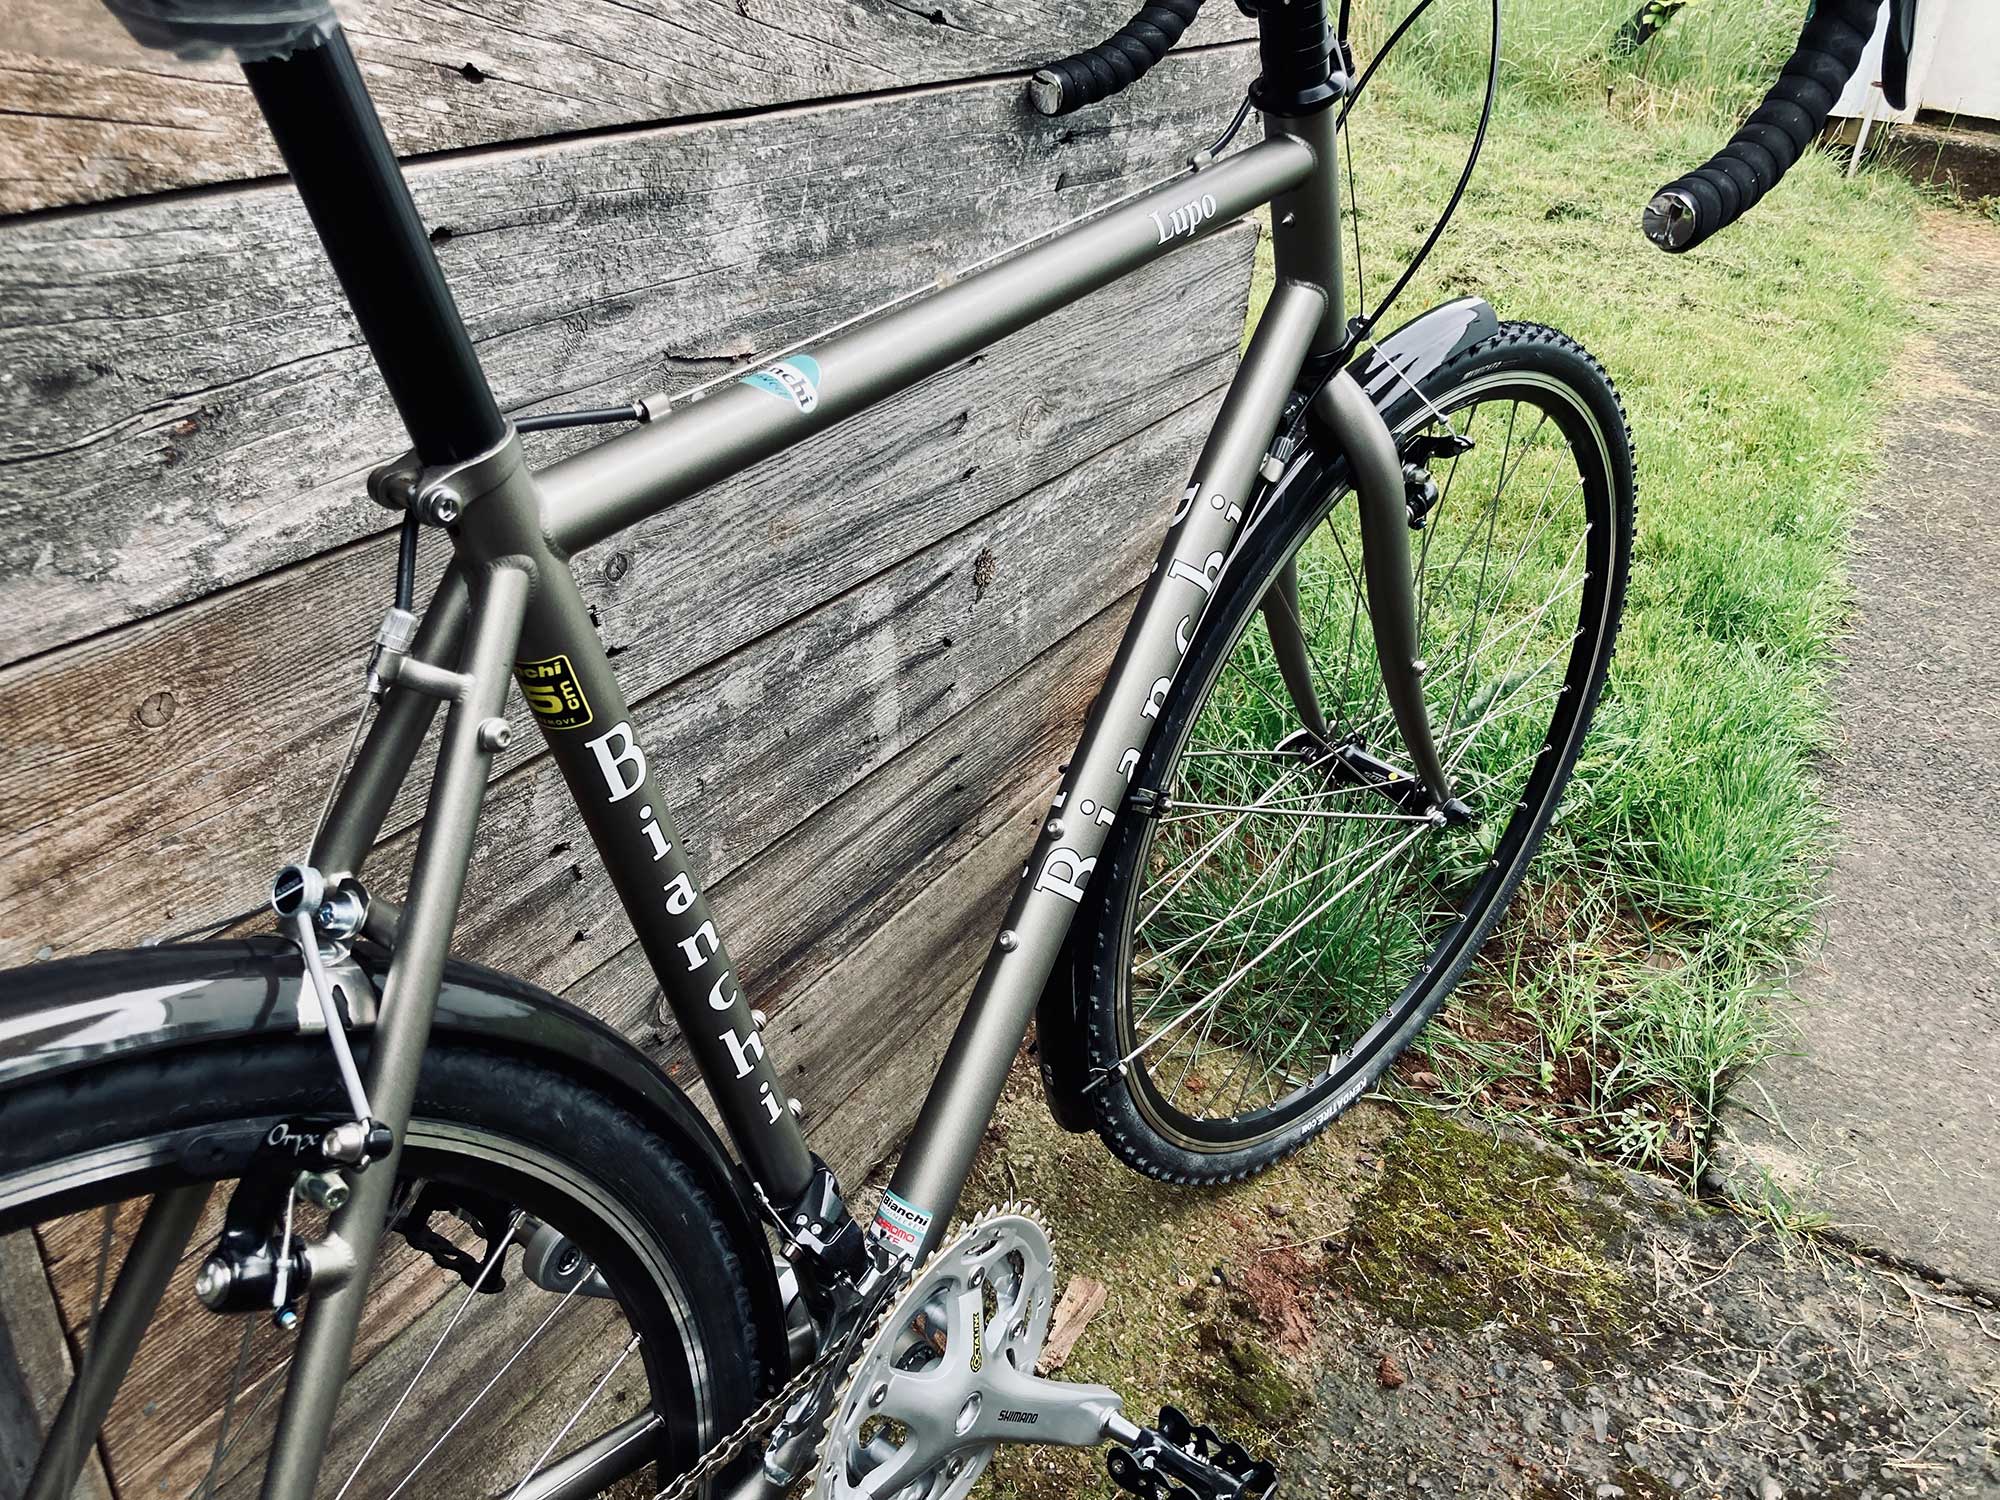 Gray bike with white lettering, Bianchi Lupo, against a wood slatted wall